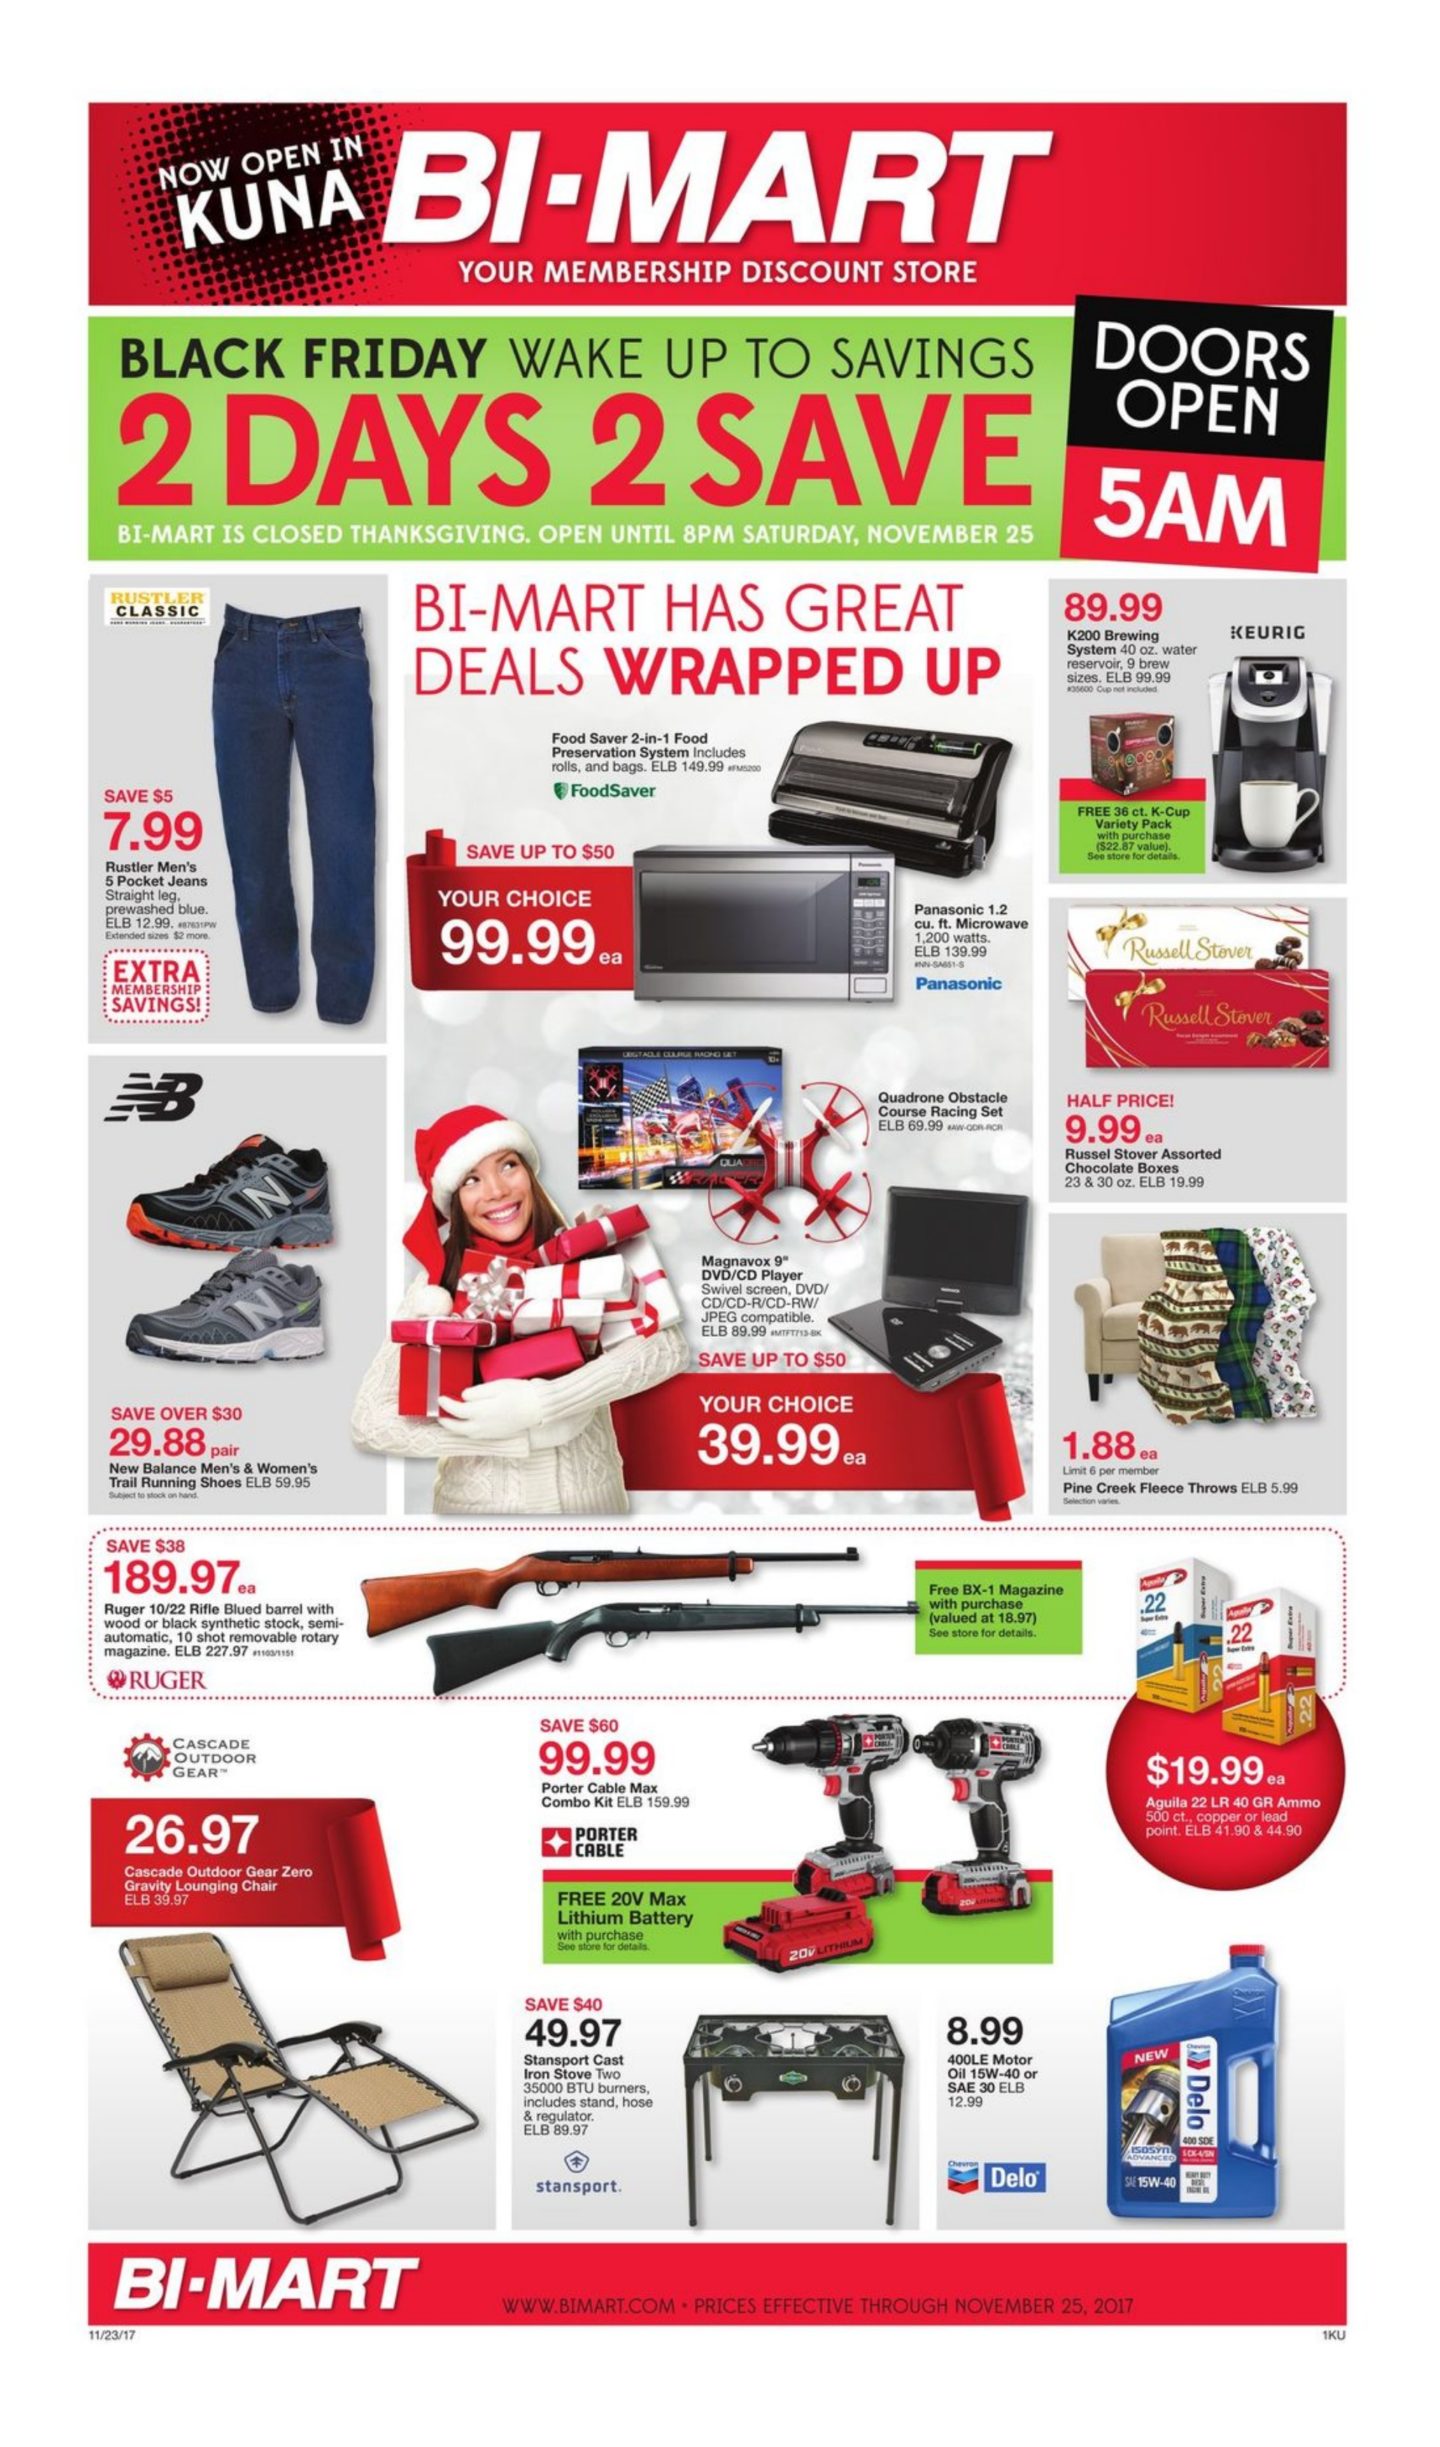 Bi-Mart Black Friday Ad 2017 - Where Have Motorcycle Gear Black Friday Deals